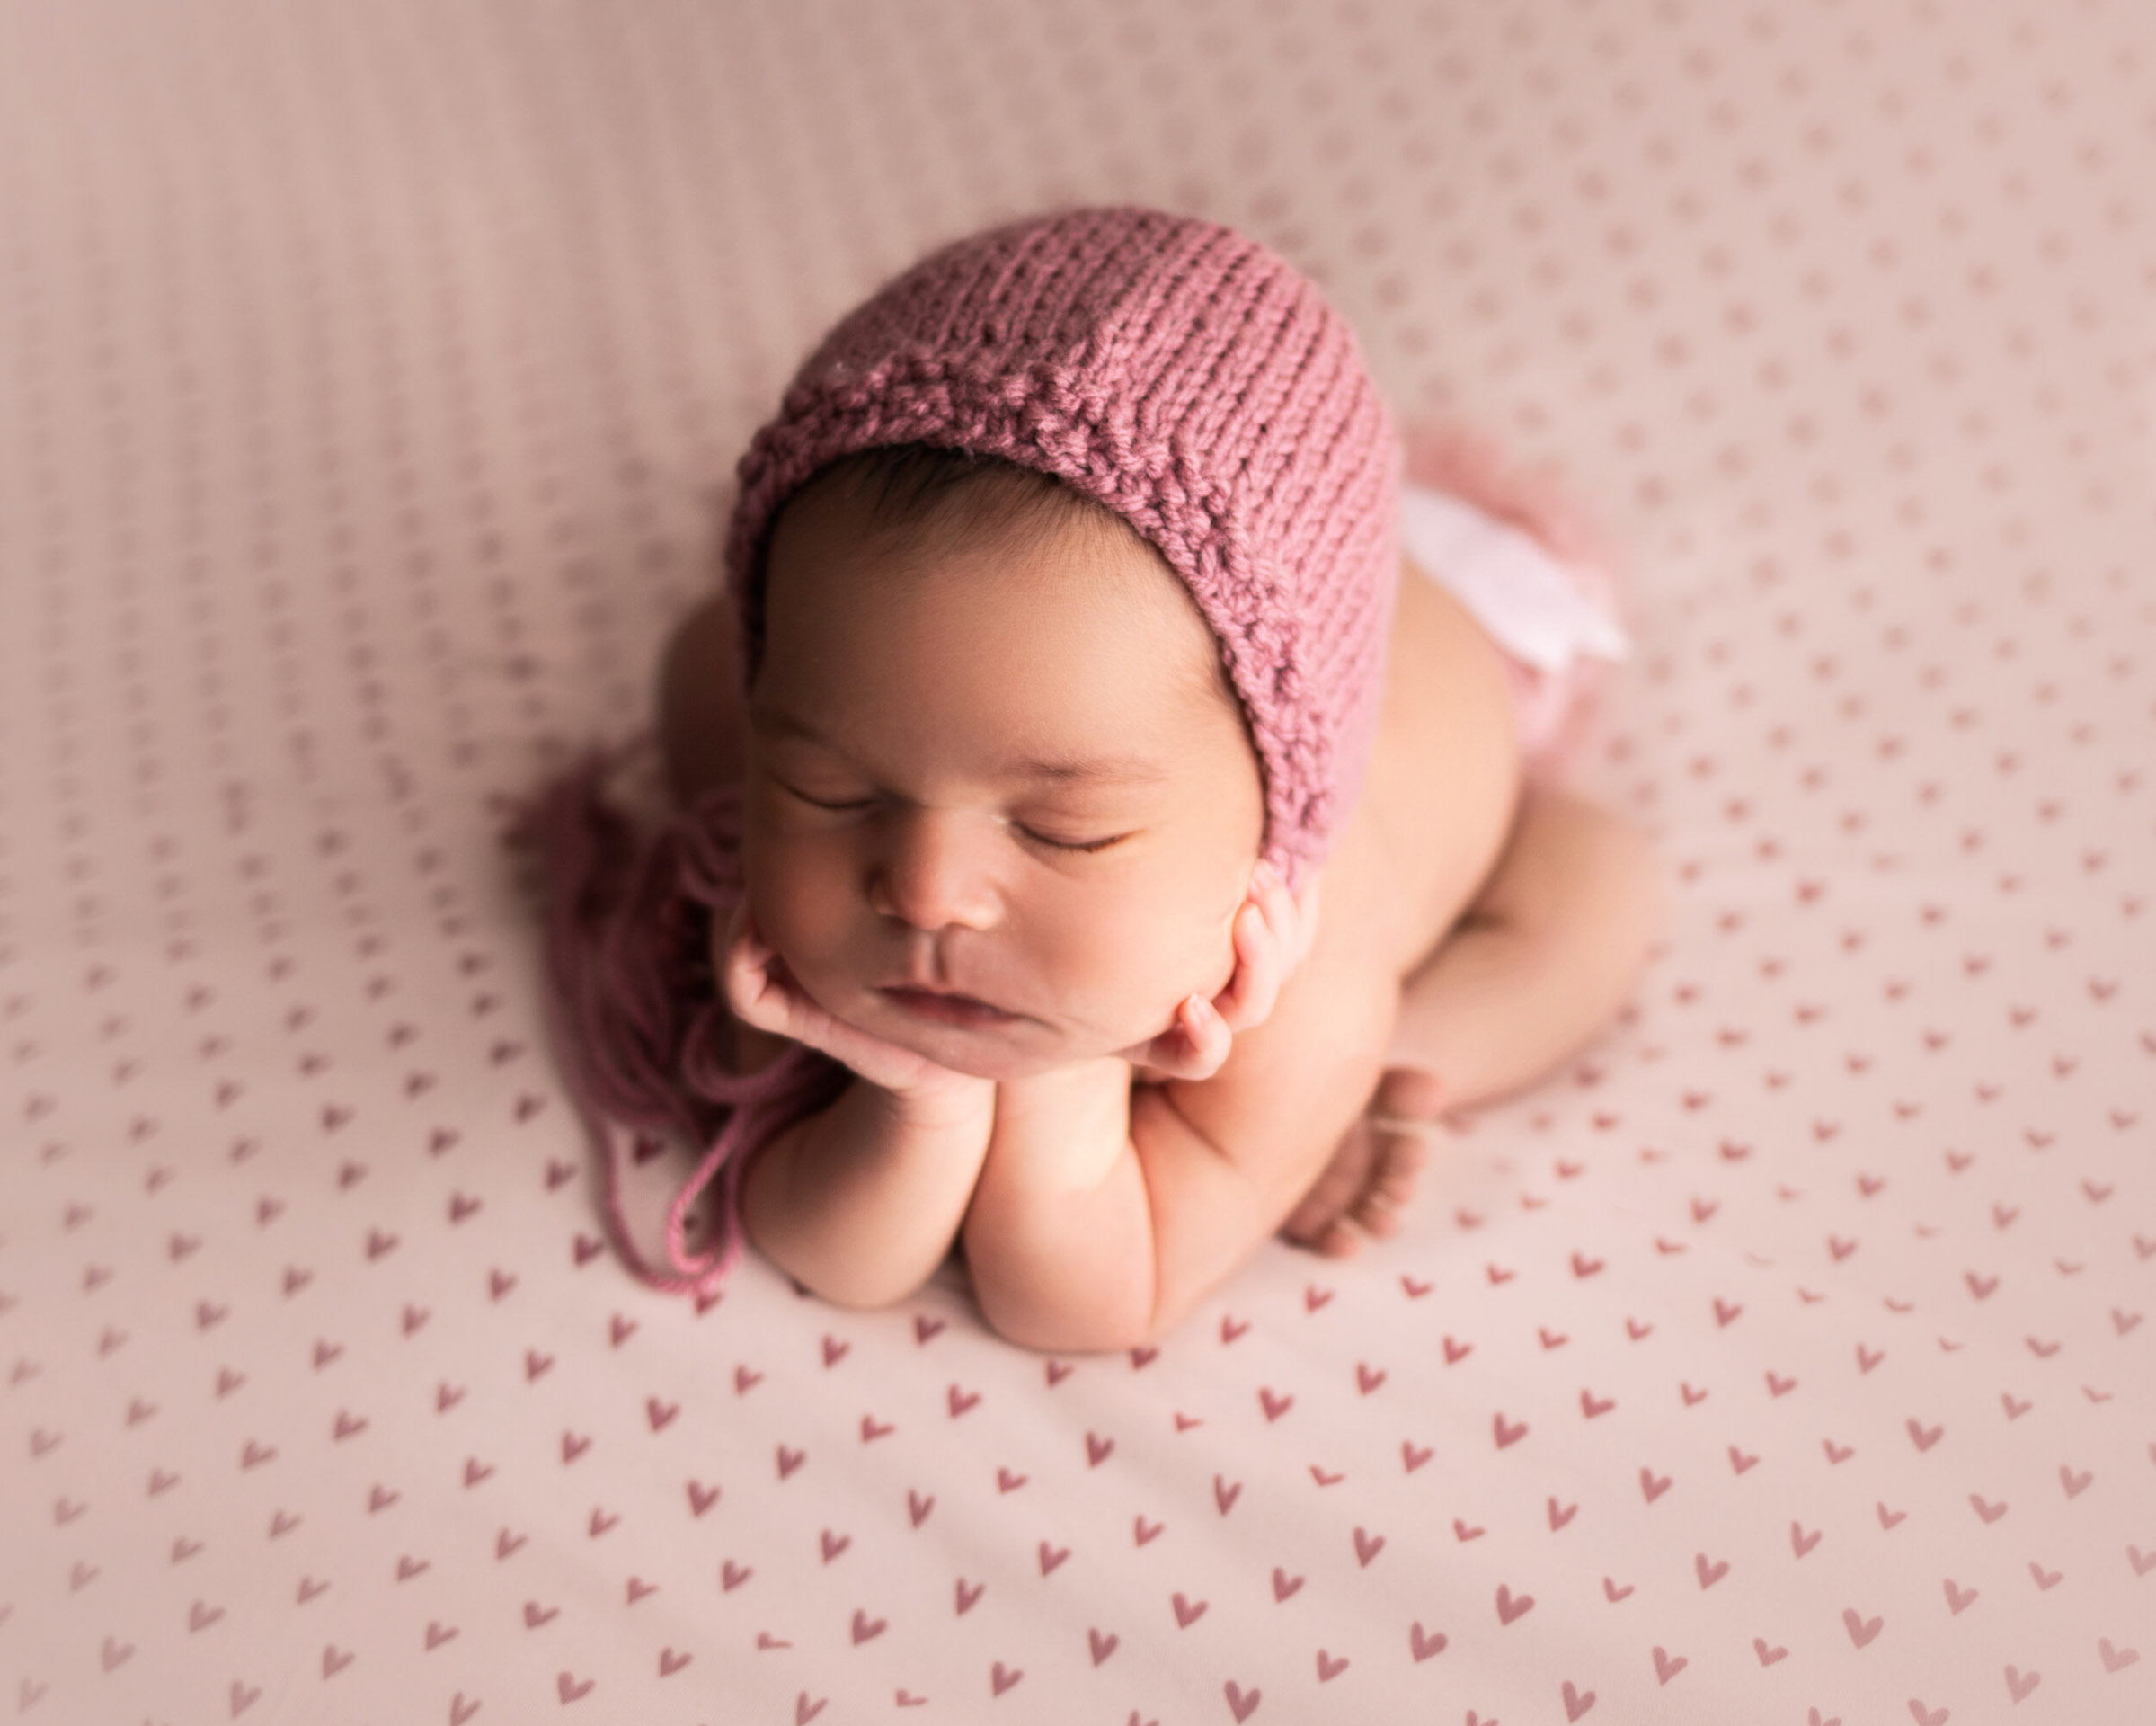 newborn girl on heart backdrop in froggy pose with pink bonnet by baby photographer in Kona mn